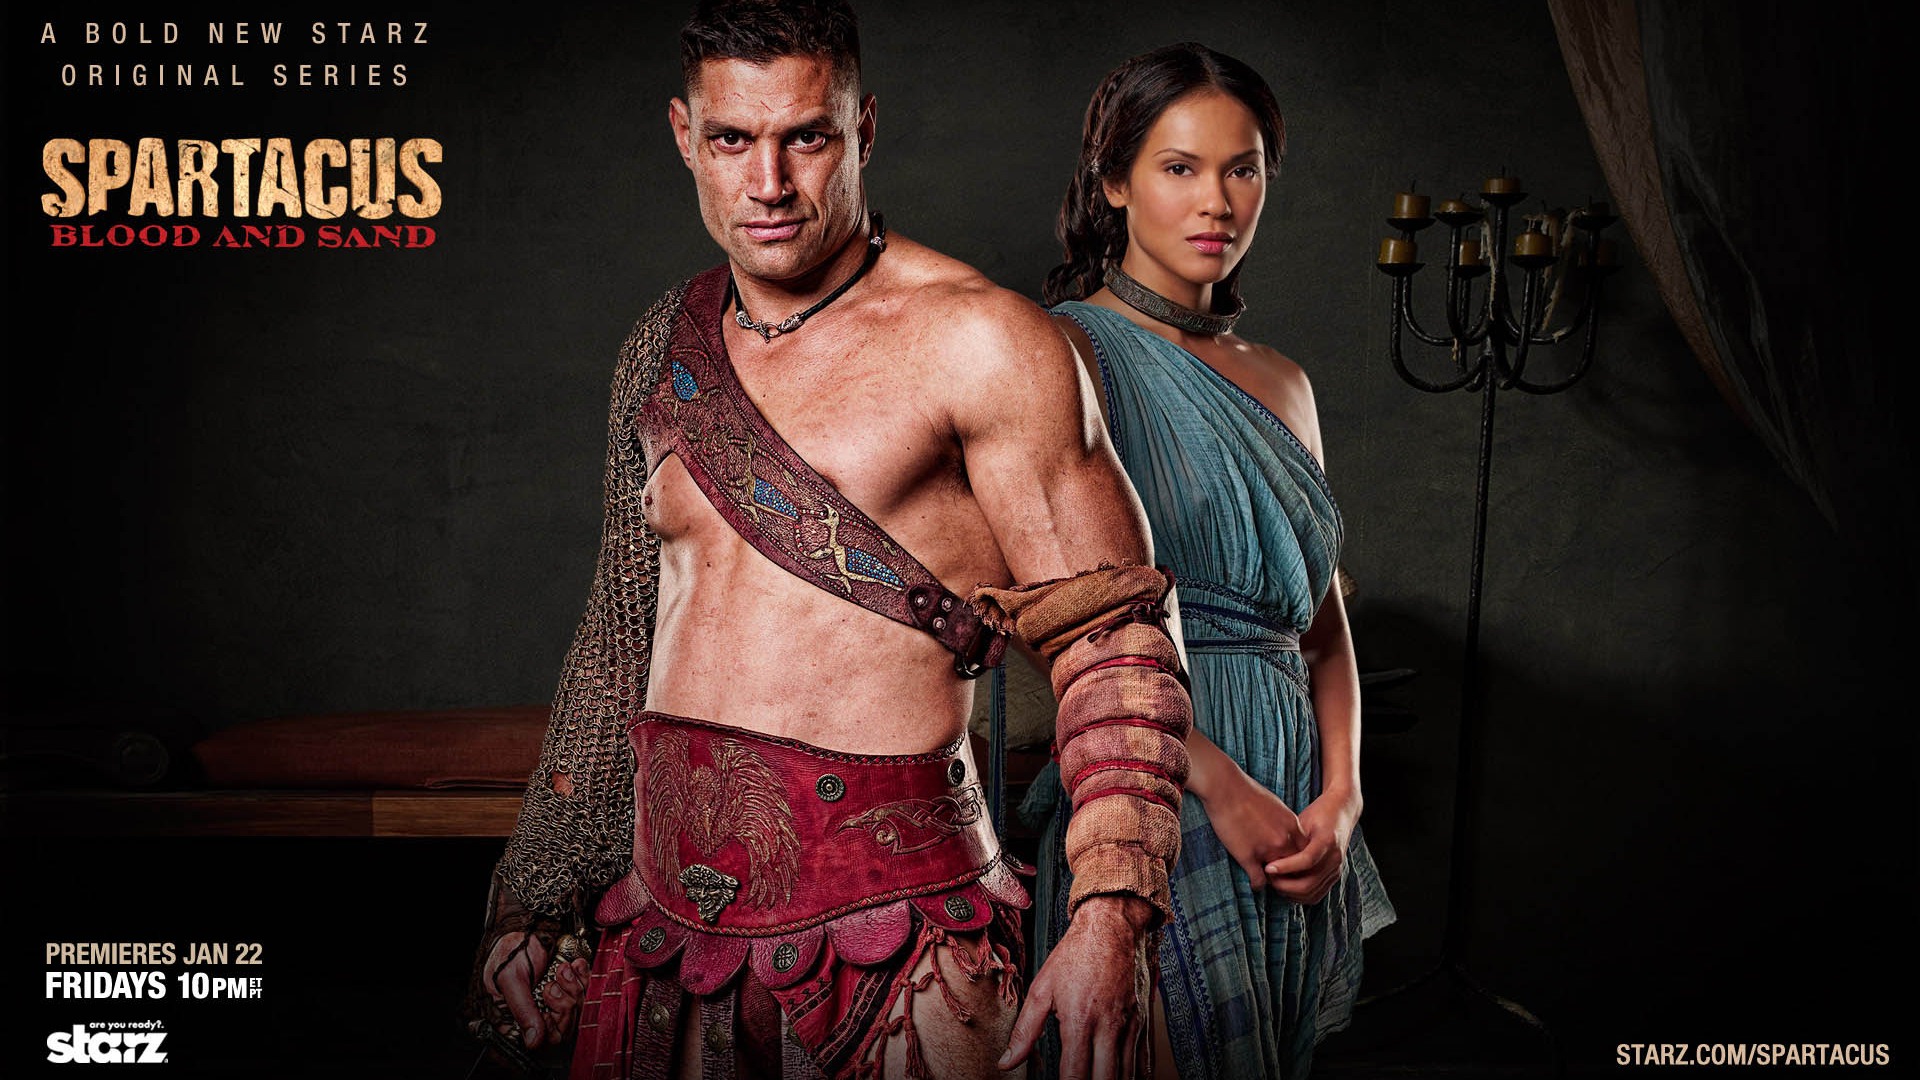 Spartacus: Blood and Sand HD Wallpaper #4 - 1920x1080